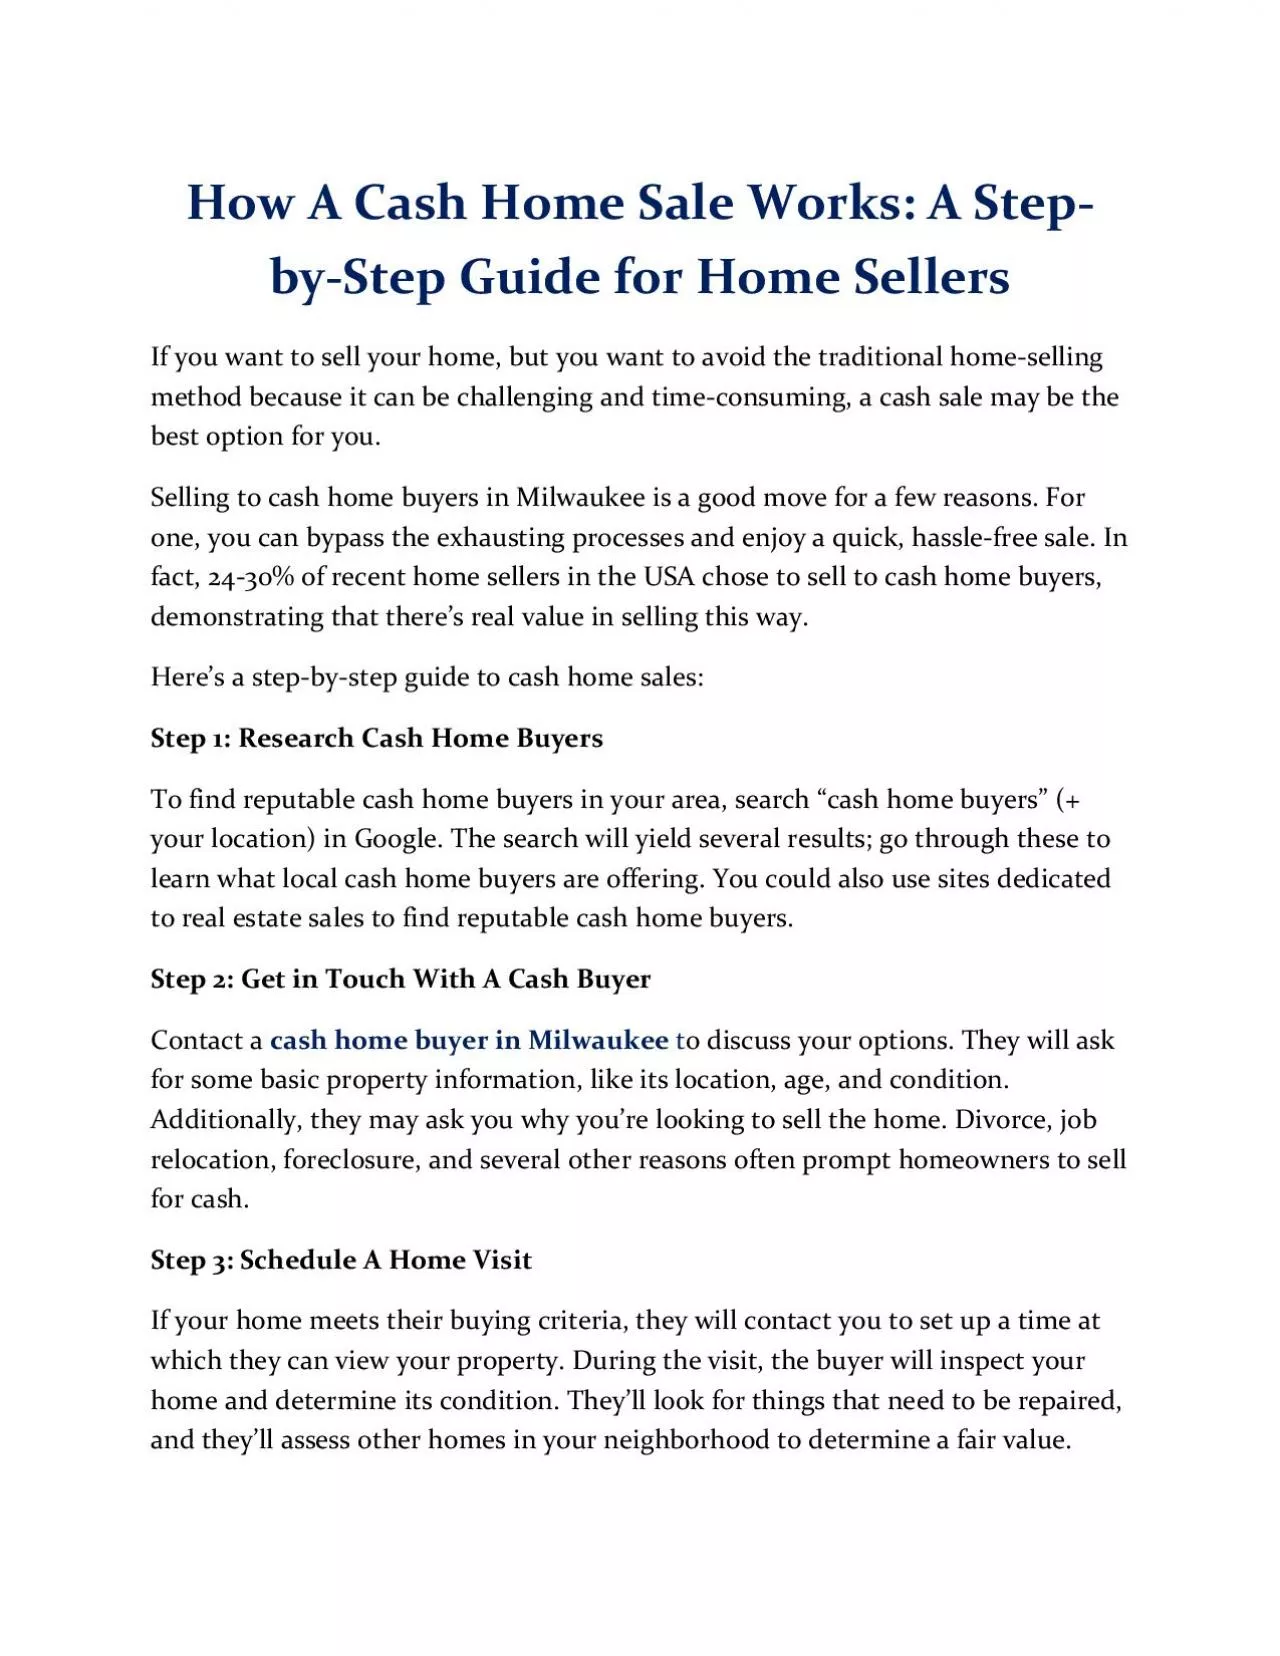 How A Cash Home Sale Works: A Step-by-Step Guide for Home Sellers